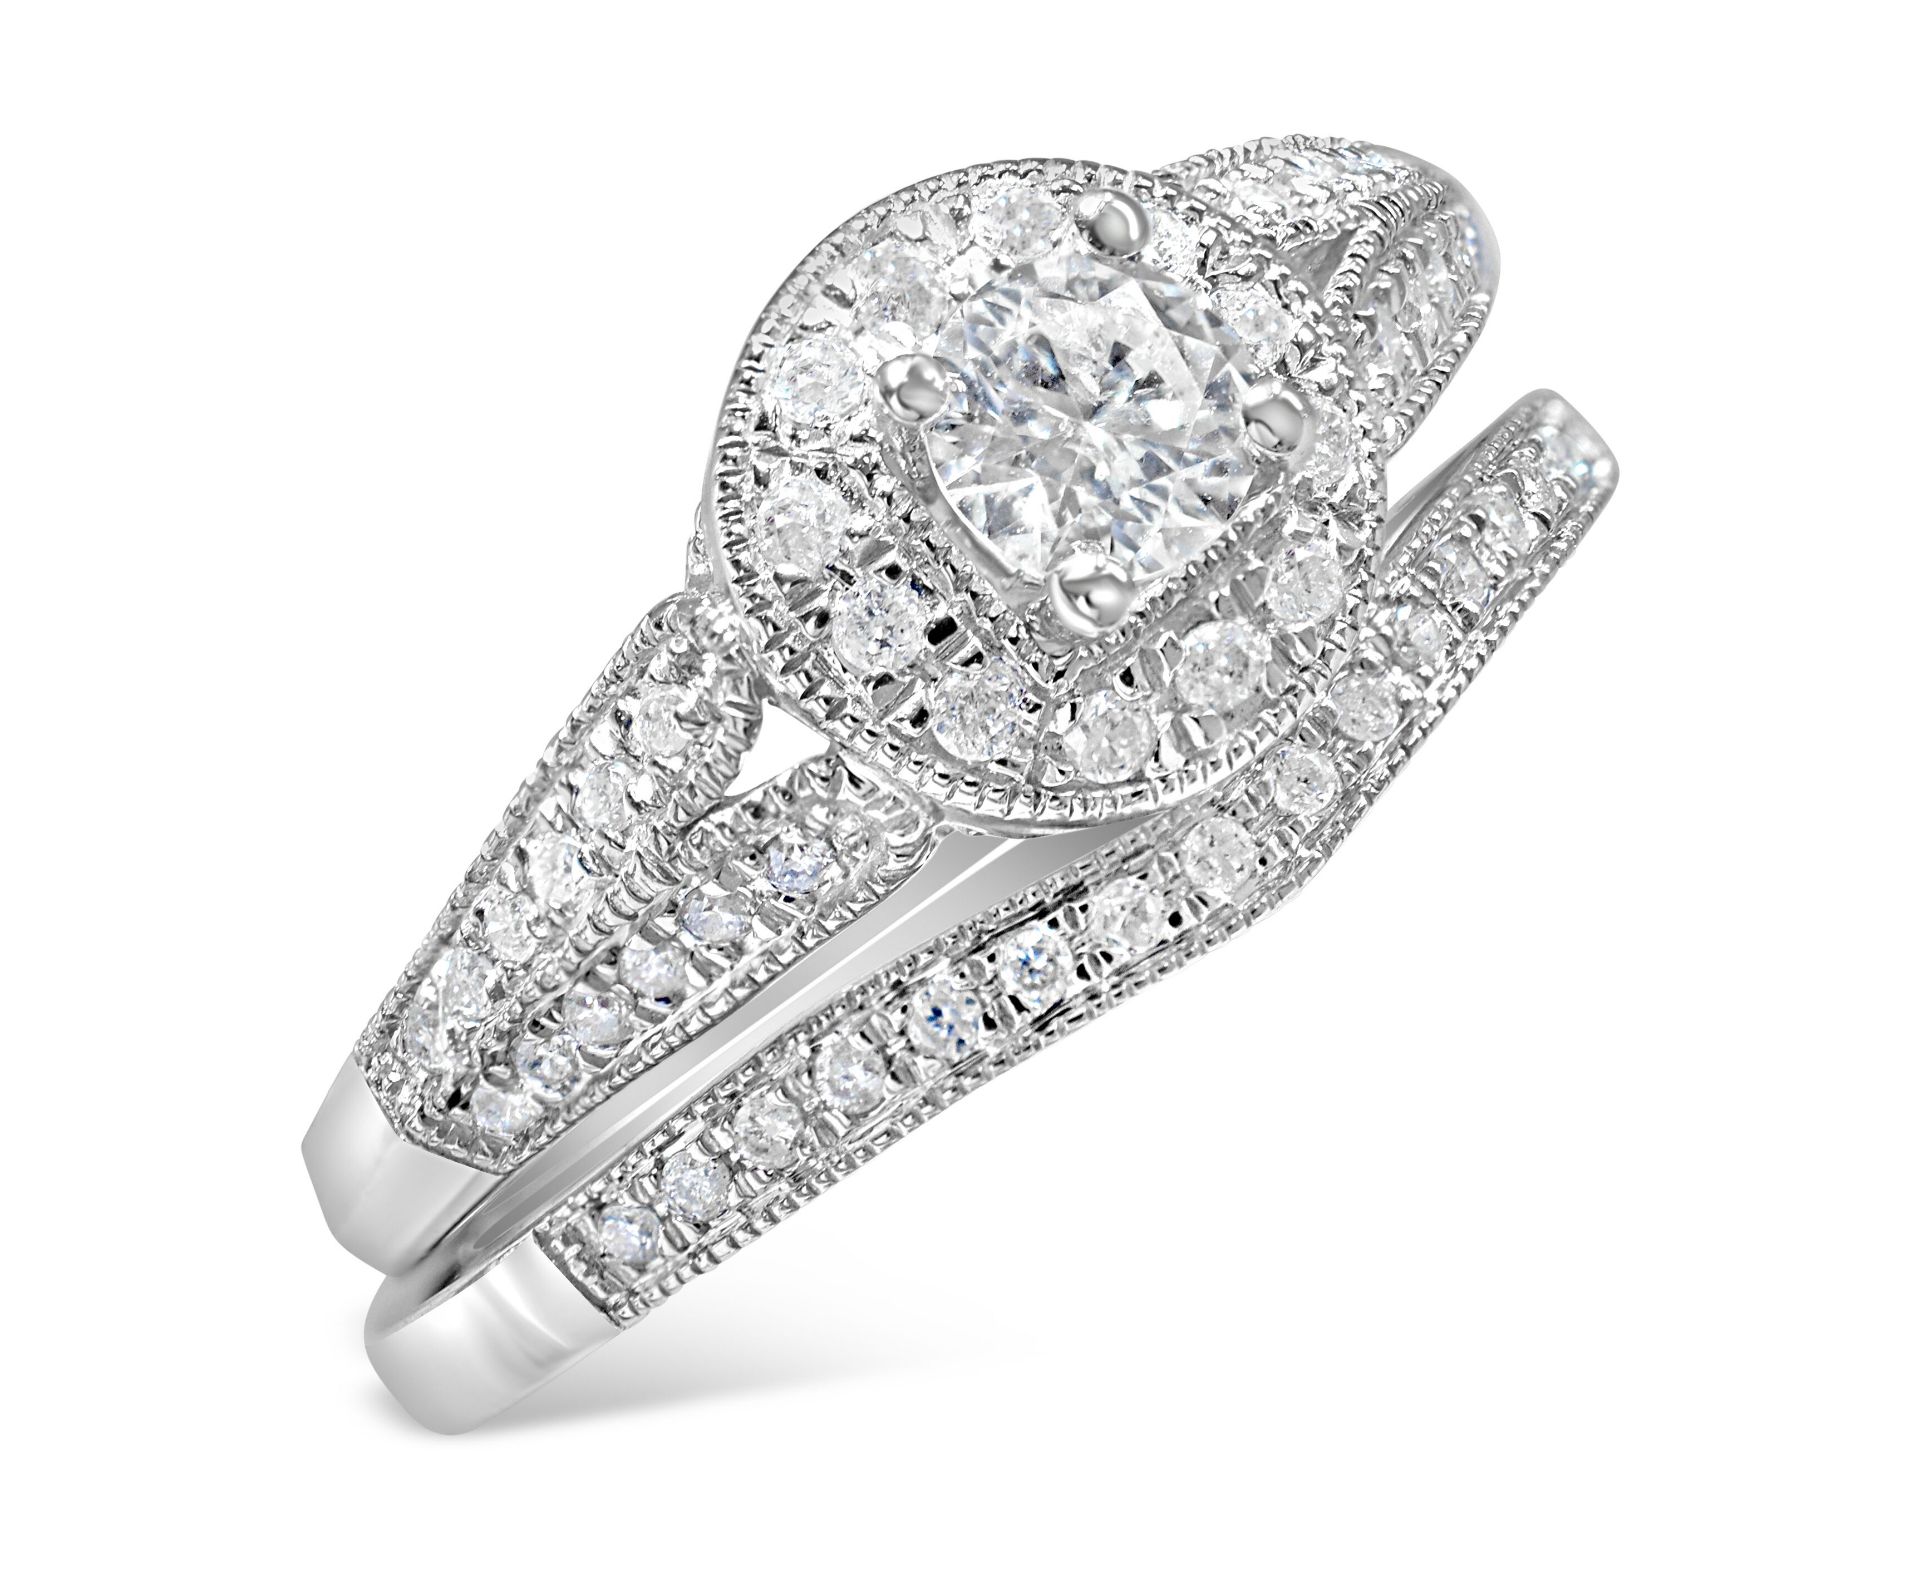 Bridal Set Of Diamond Engagement and Wedding Rings with over 50 diamonds in total, Metal 9ct White